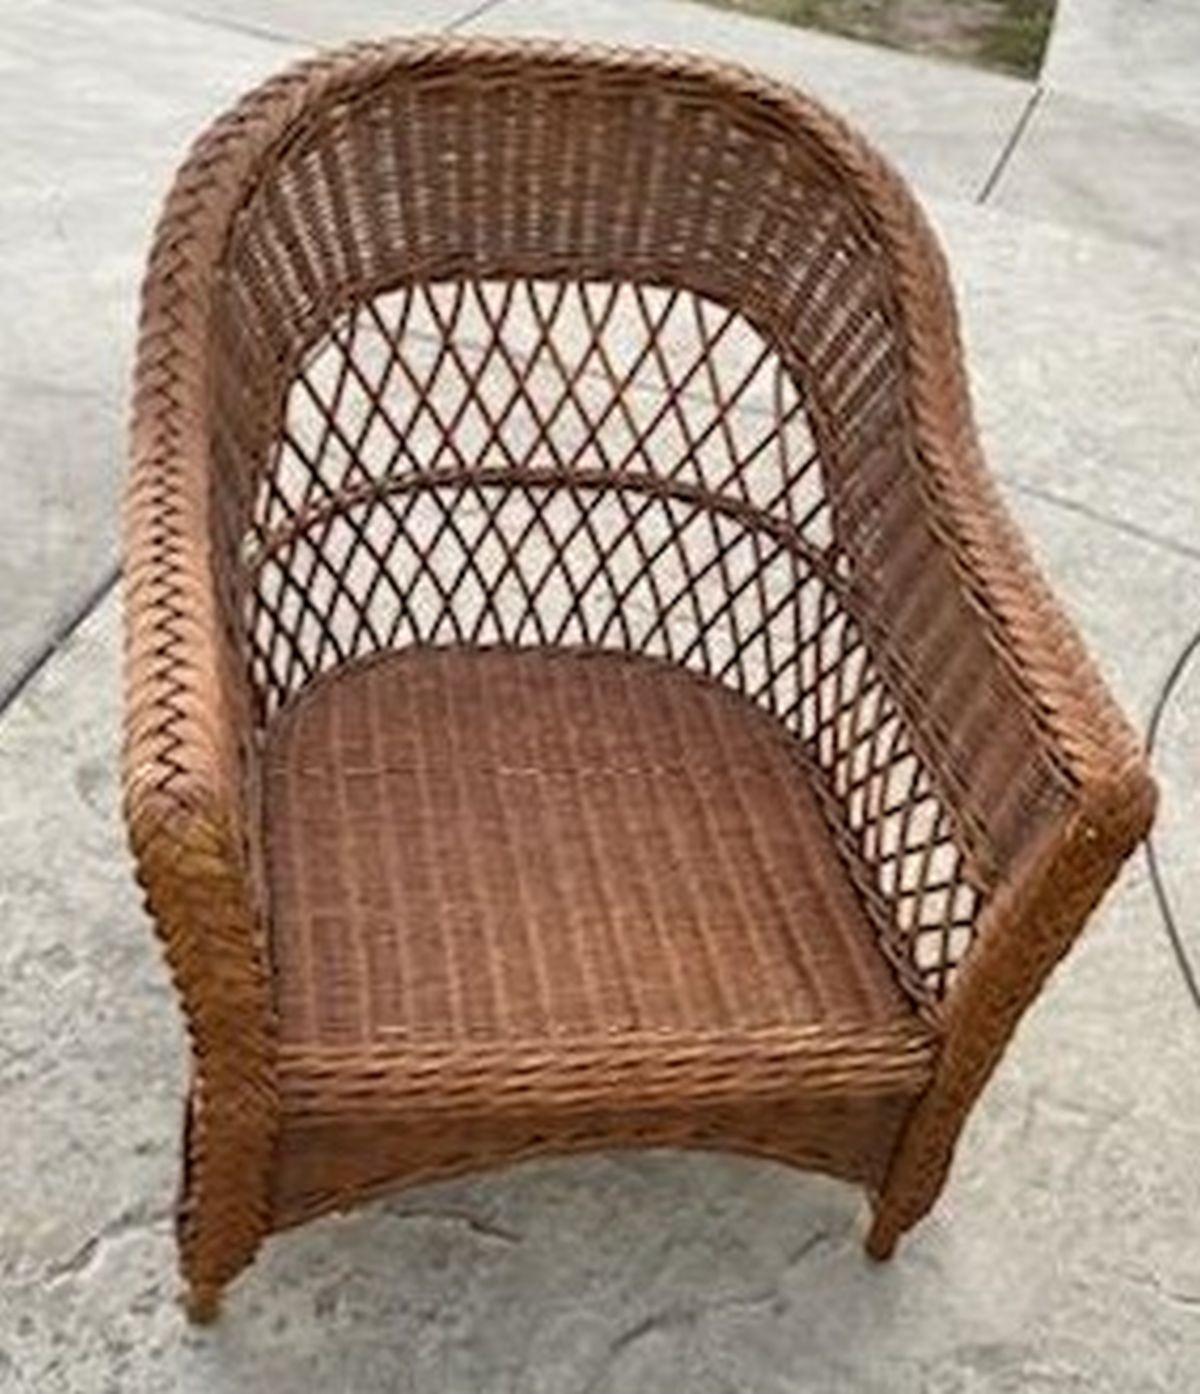 This fine original old surface wicker chair is in fine sturdy condition. It has a wonderful aged patina.